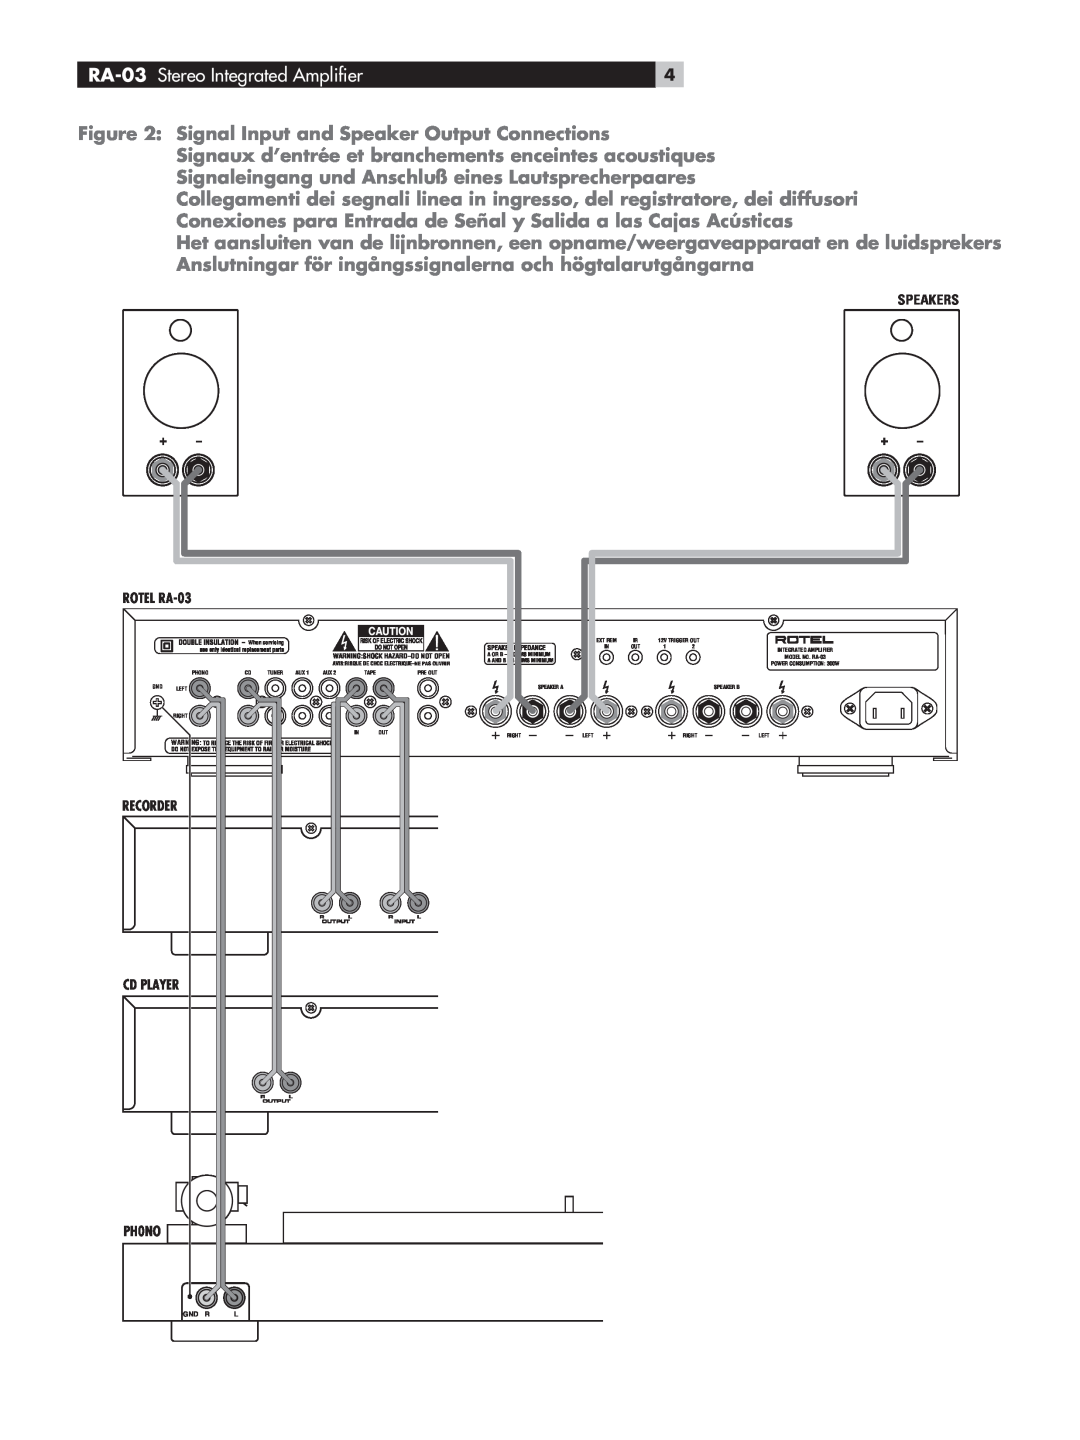 Rotel owner manual RA-03 Stereo Integrated Ampliﬁer, SPEAKERS ROTEL RA-03, Recorder, Cd Player, PH0NO 